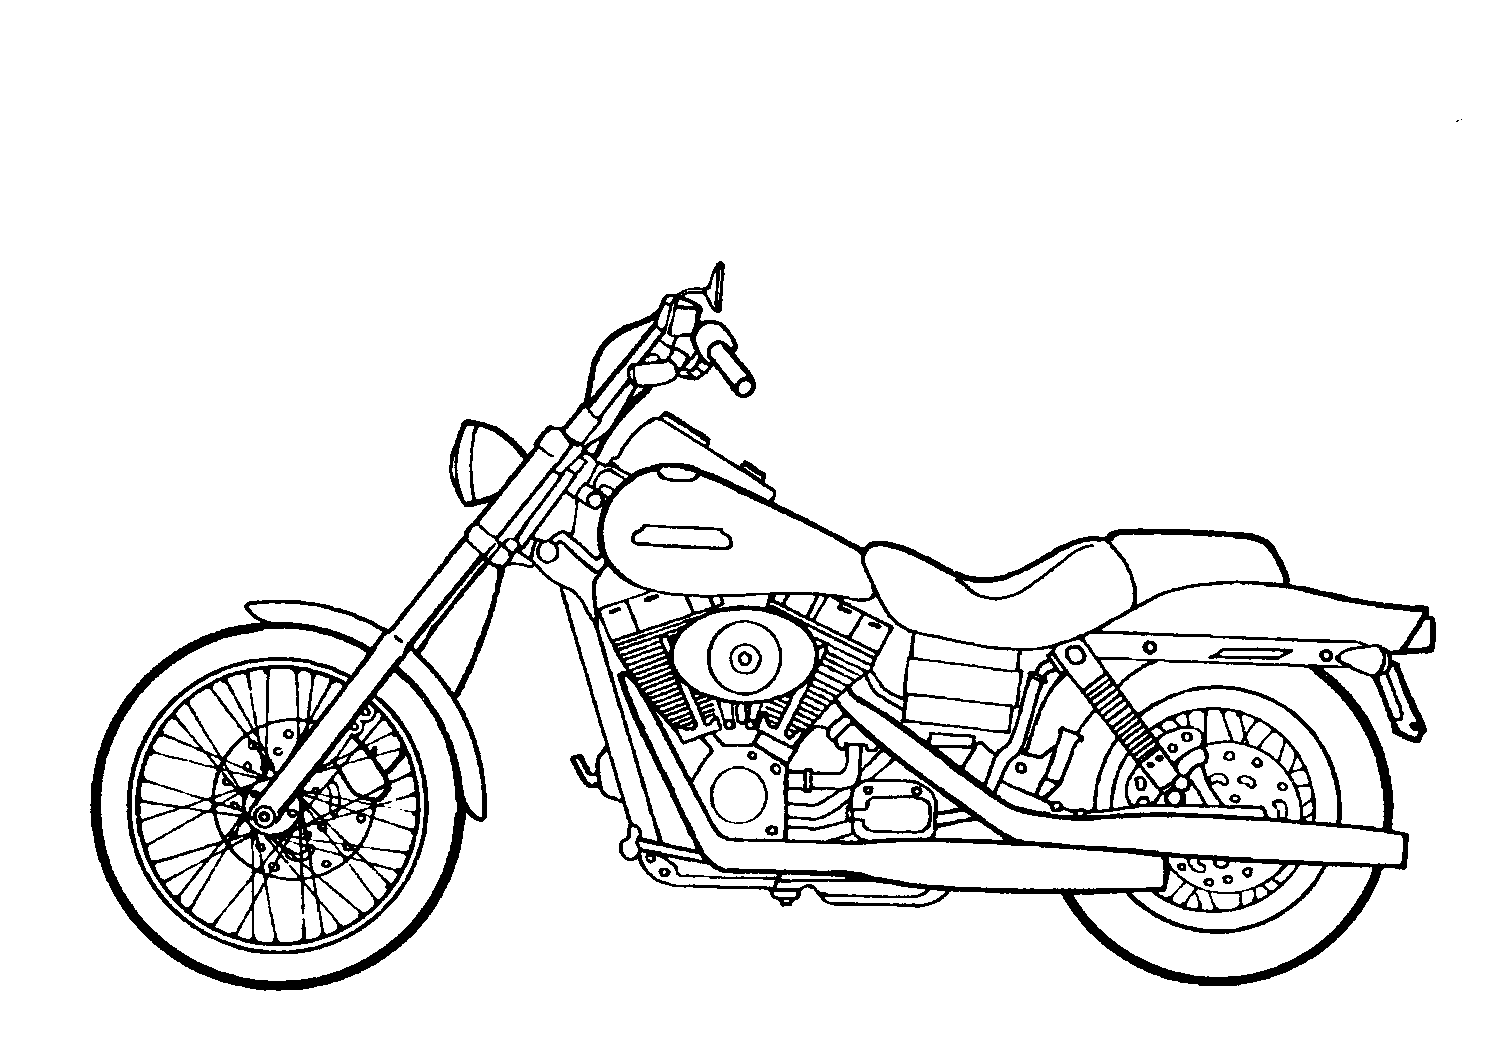 police motorcycle coloring pages